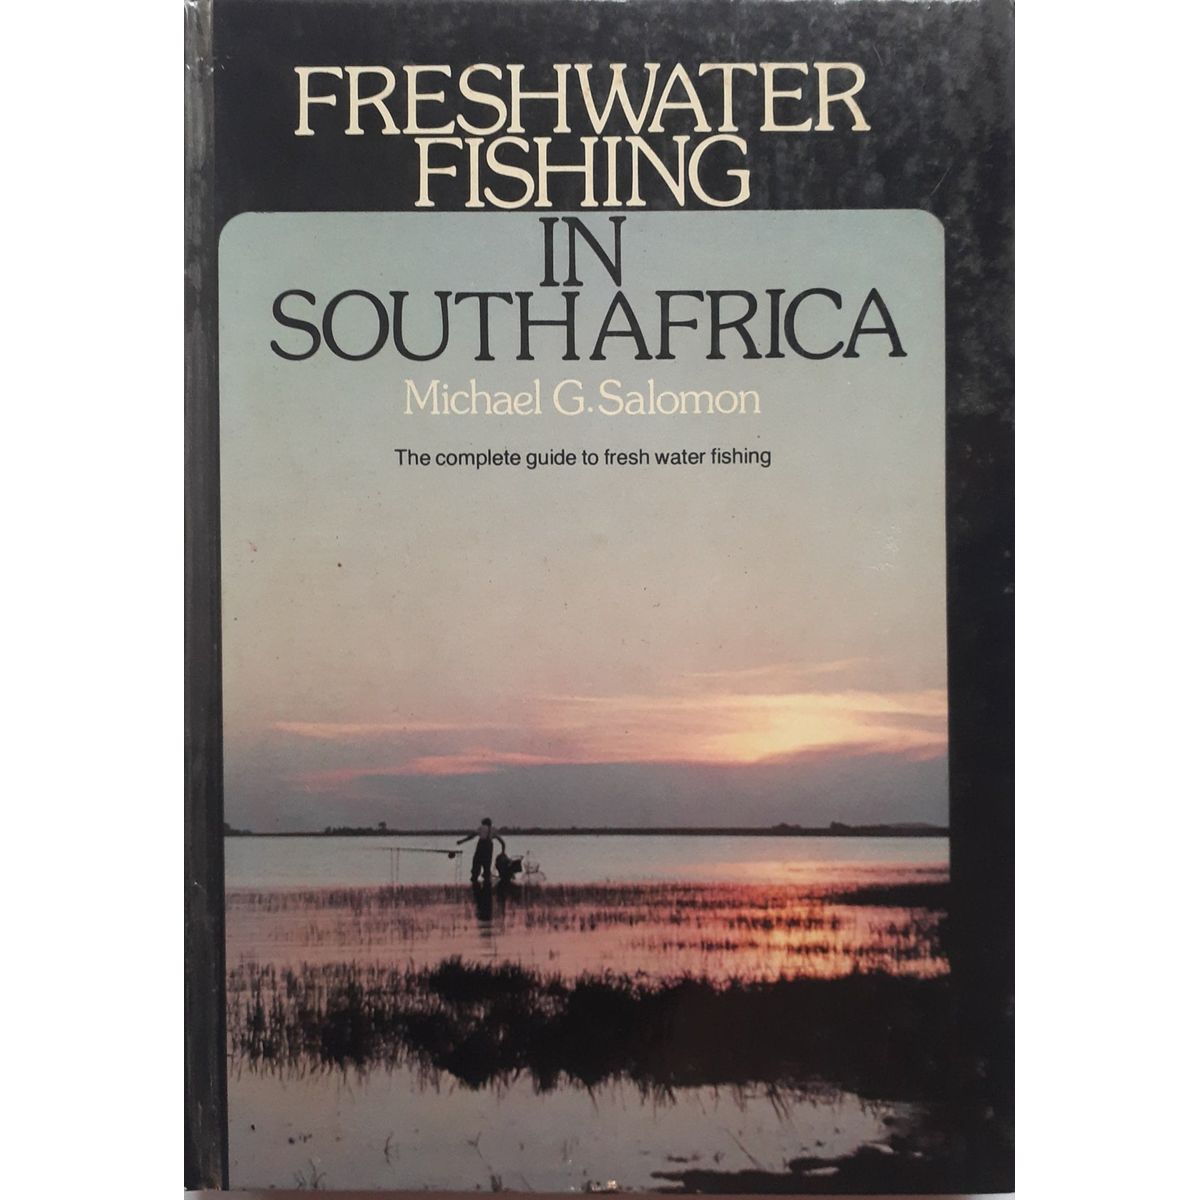 ISBN: 9780868460208 / 0868460206 - Freshwater Fishing in South Africa: The Complete Guide to Fresh Water Fishing by Michael G Salomon [1983]